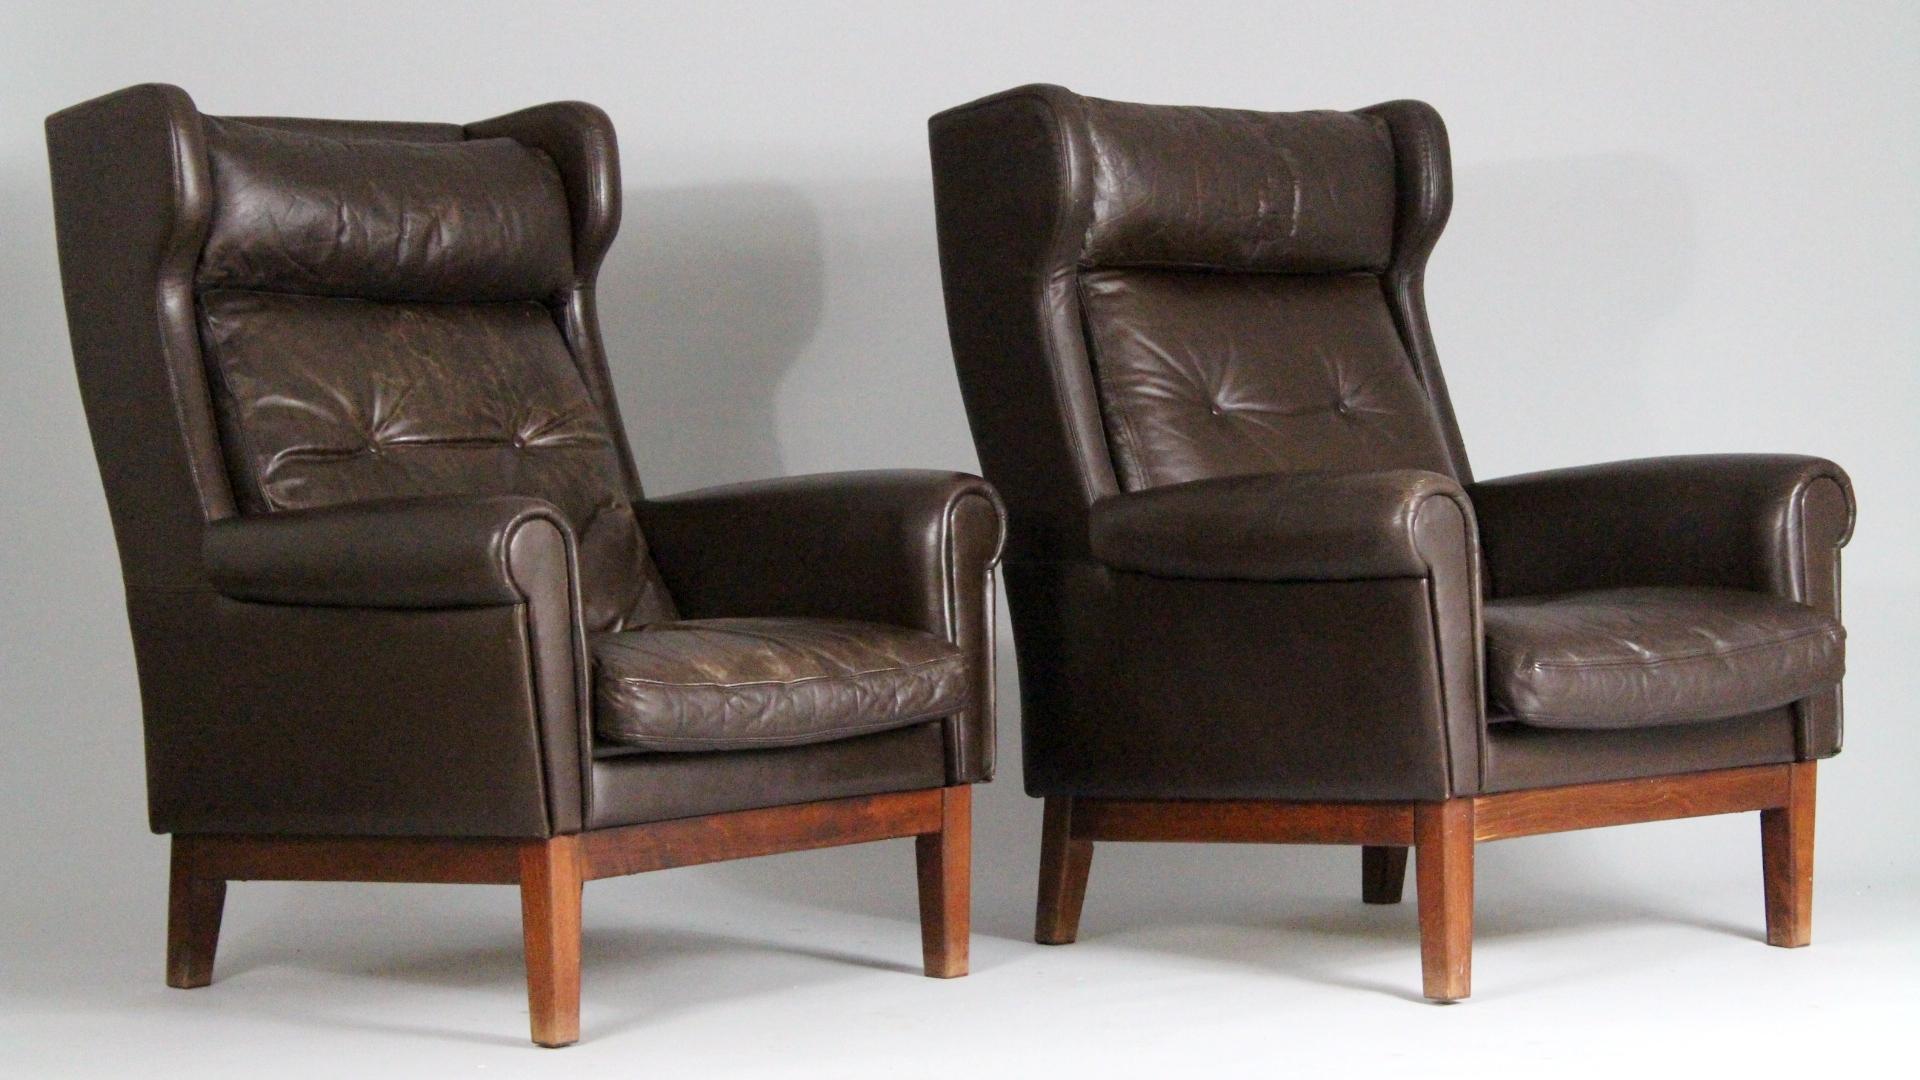 Pair of scandinavian club chairs with well worn original leather upholstery from the 1970s. Good original condition with nice patina.